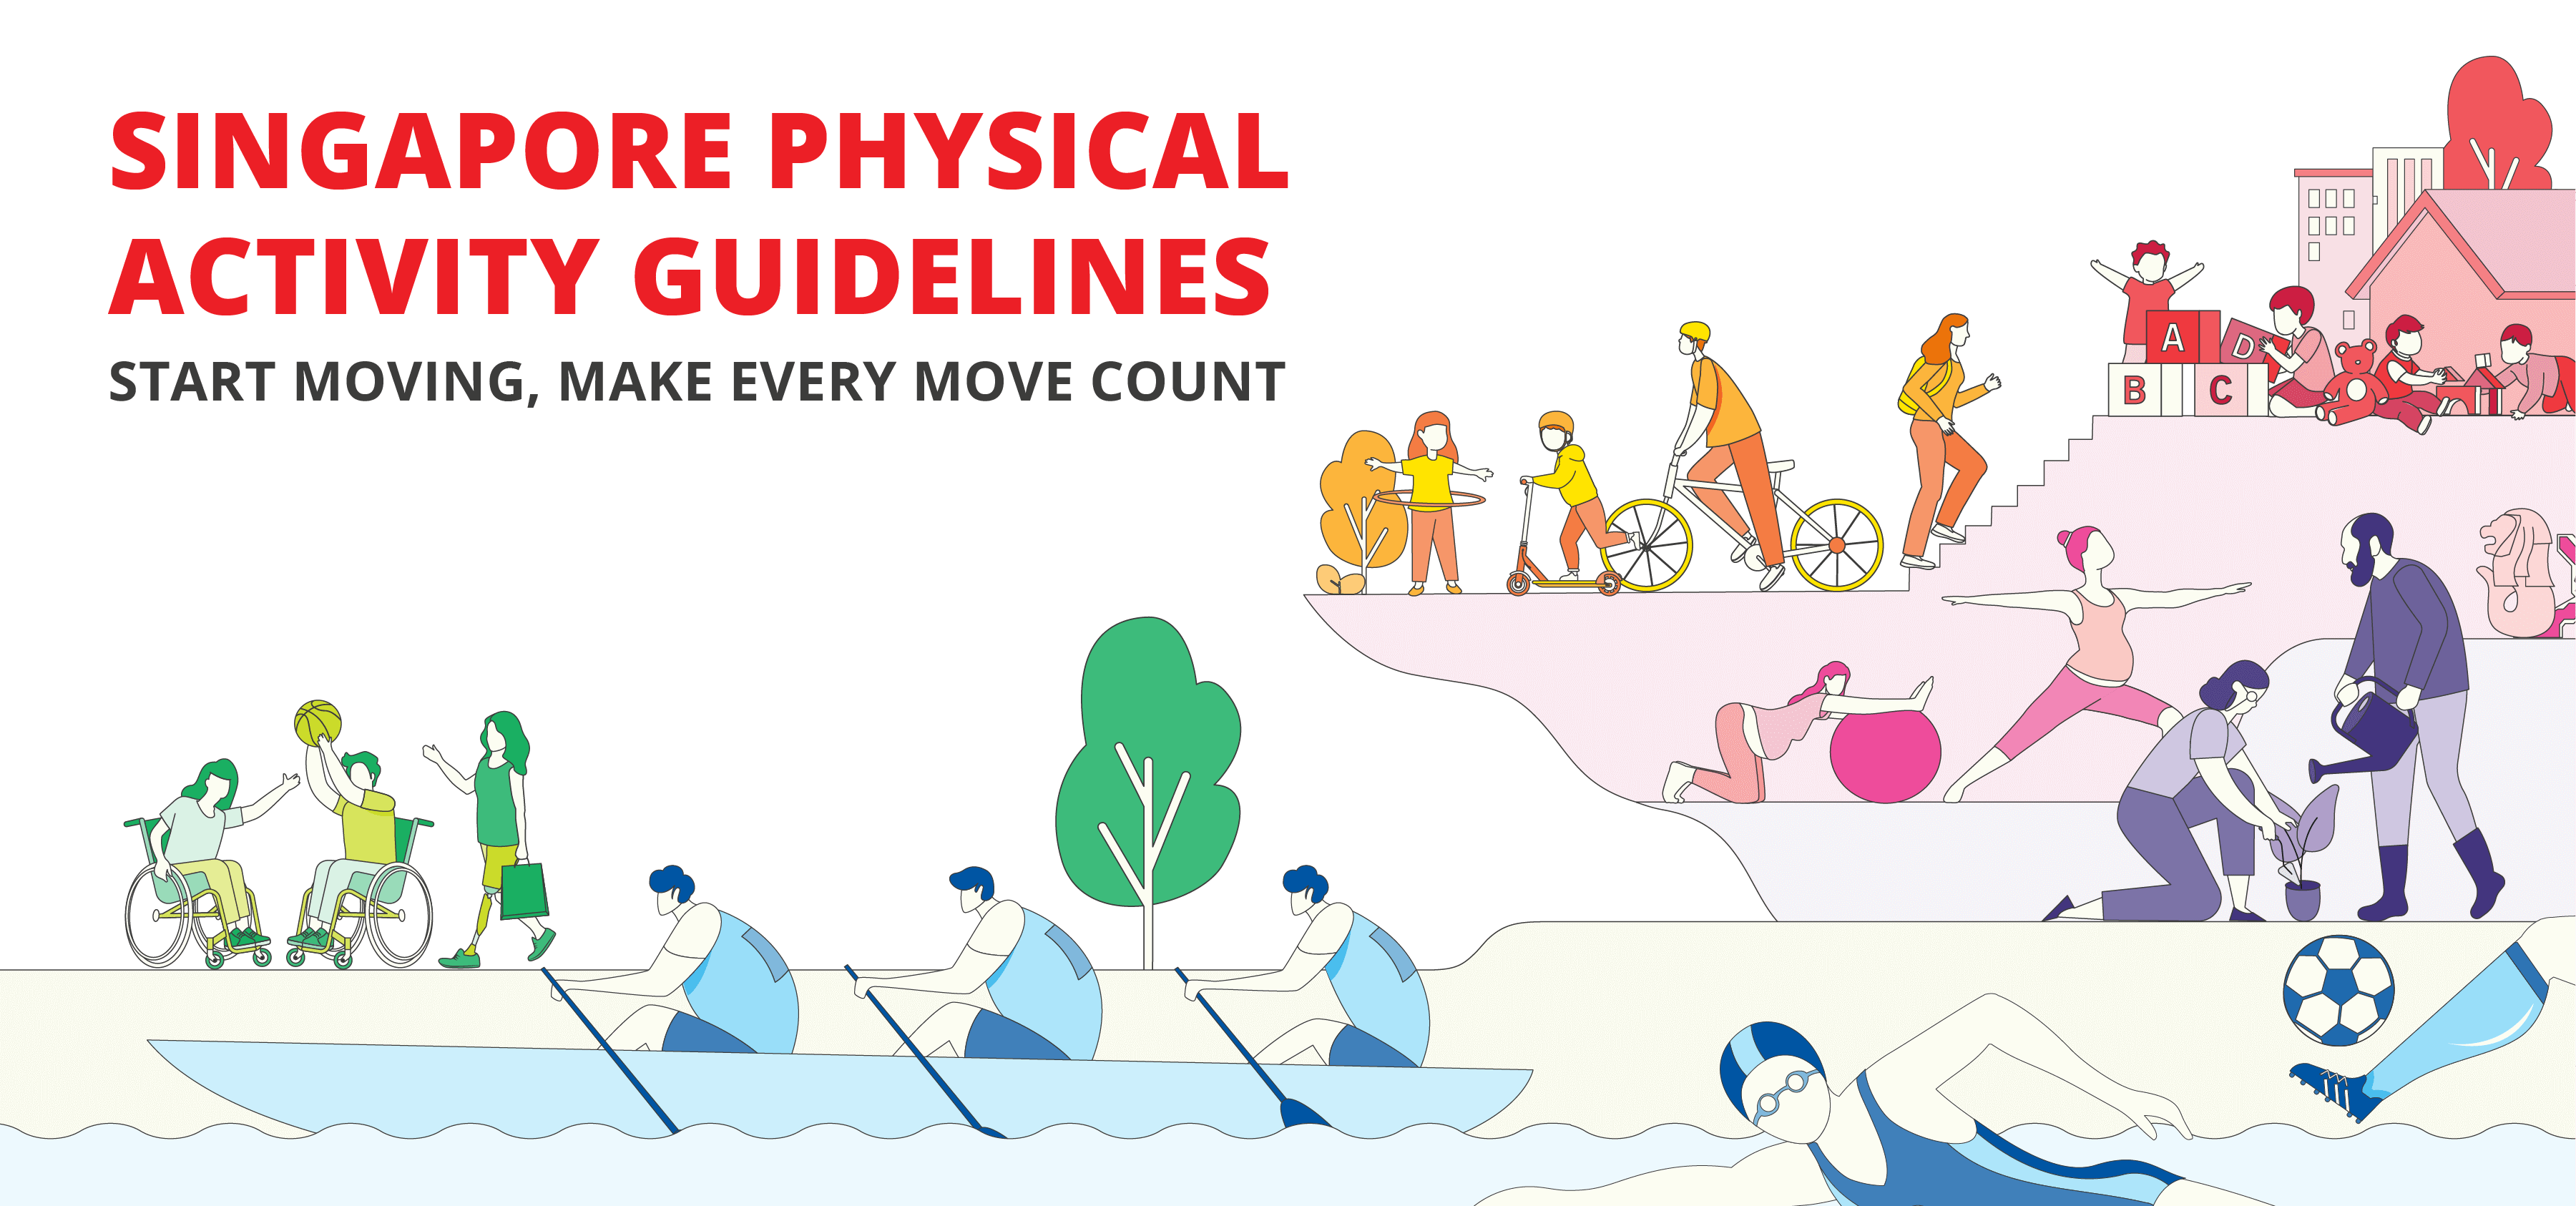 SINGAPORE PHYSICAL ACTIVITY GUIDELINES